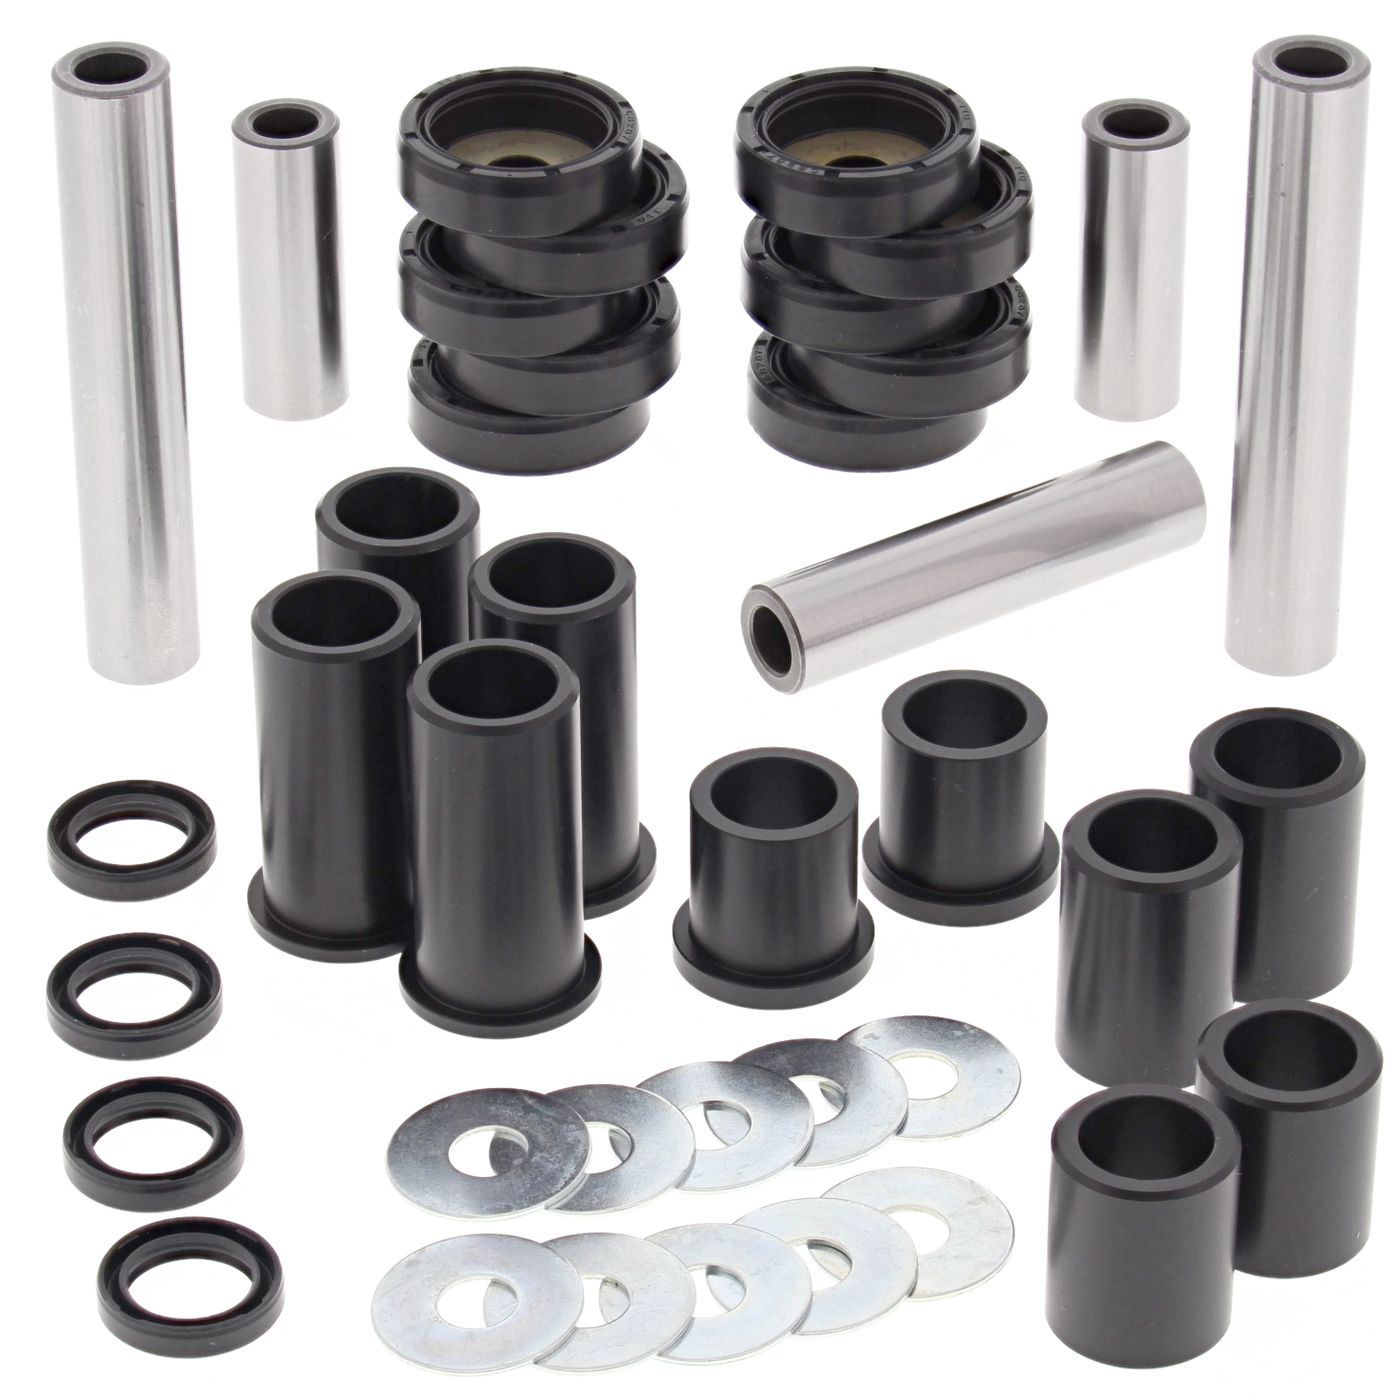 Wrp Rear Ind. Suspension Kits - WRP501045 image